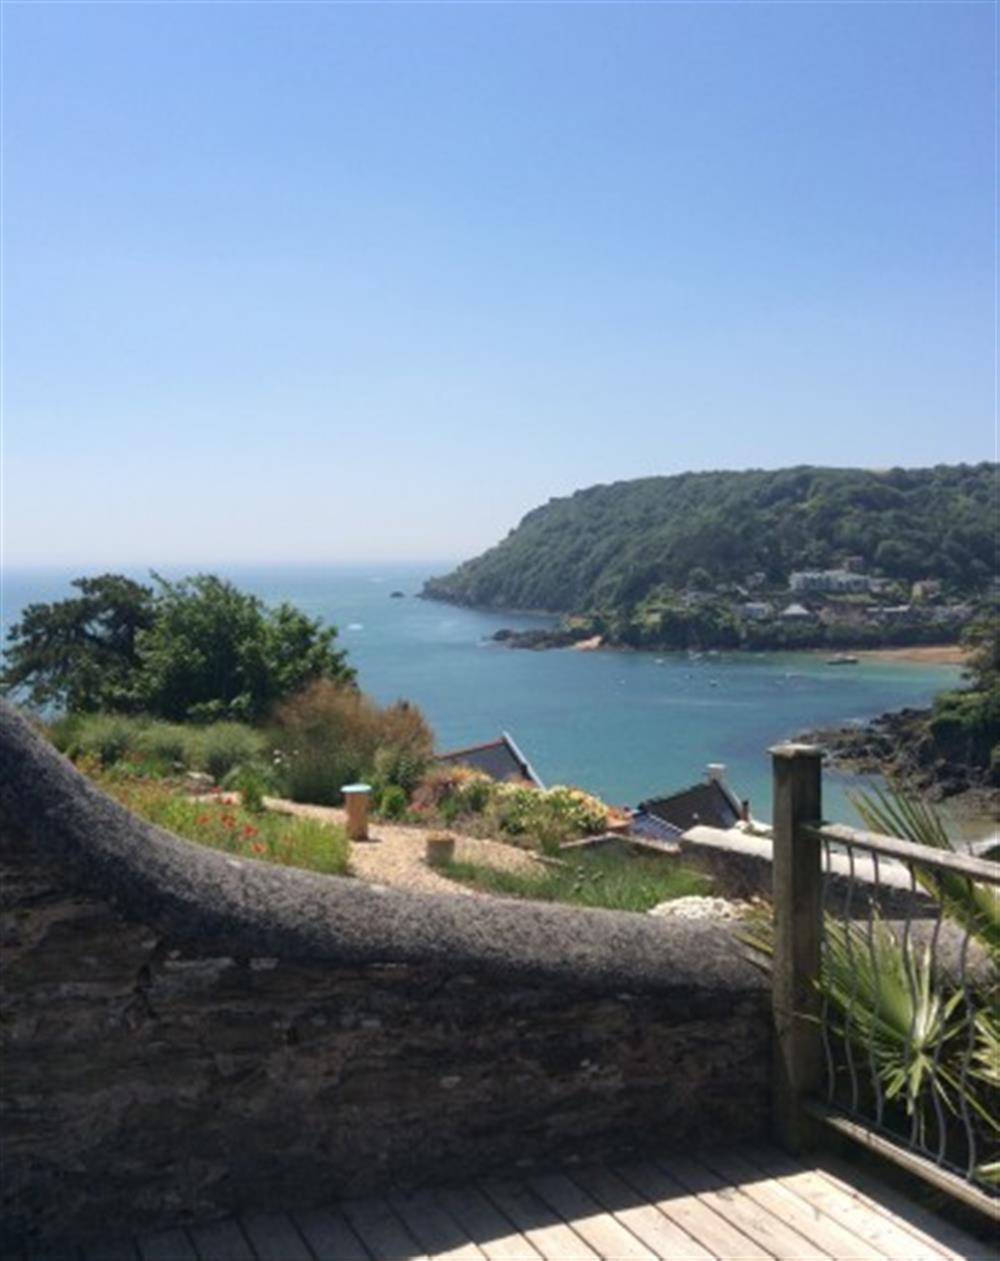 The view from the deck at 4 Hazeldene in Salcombe